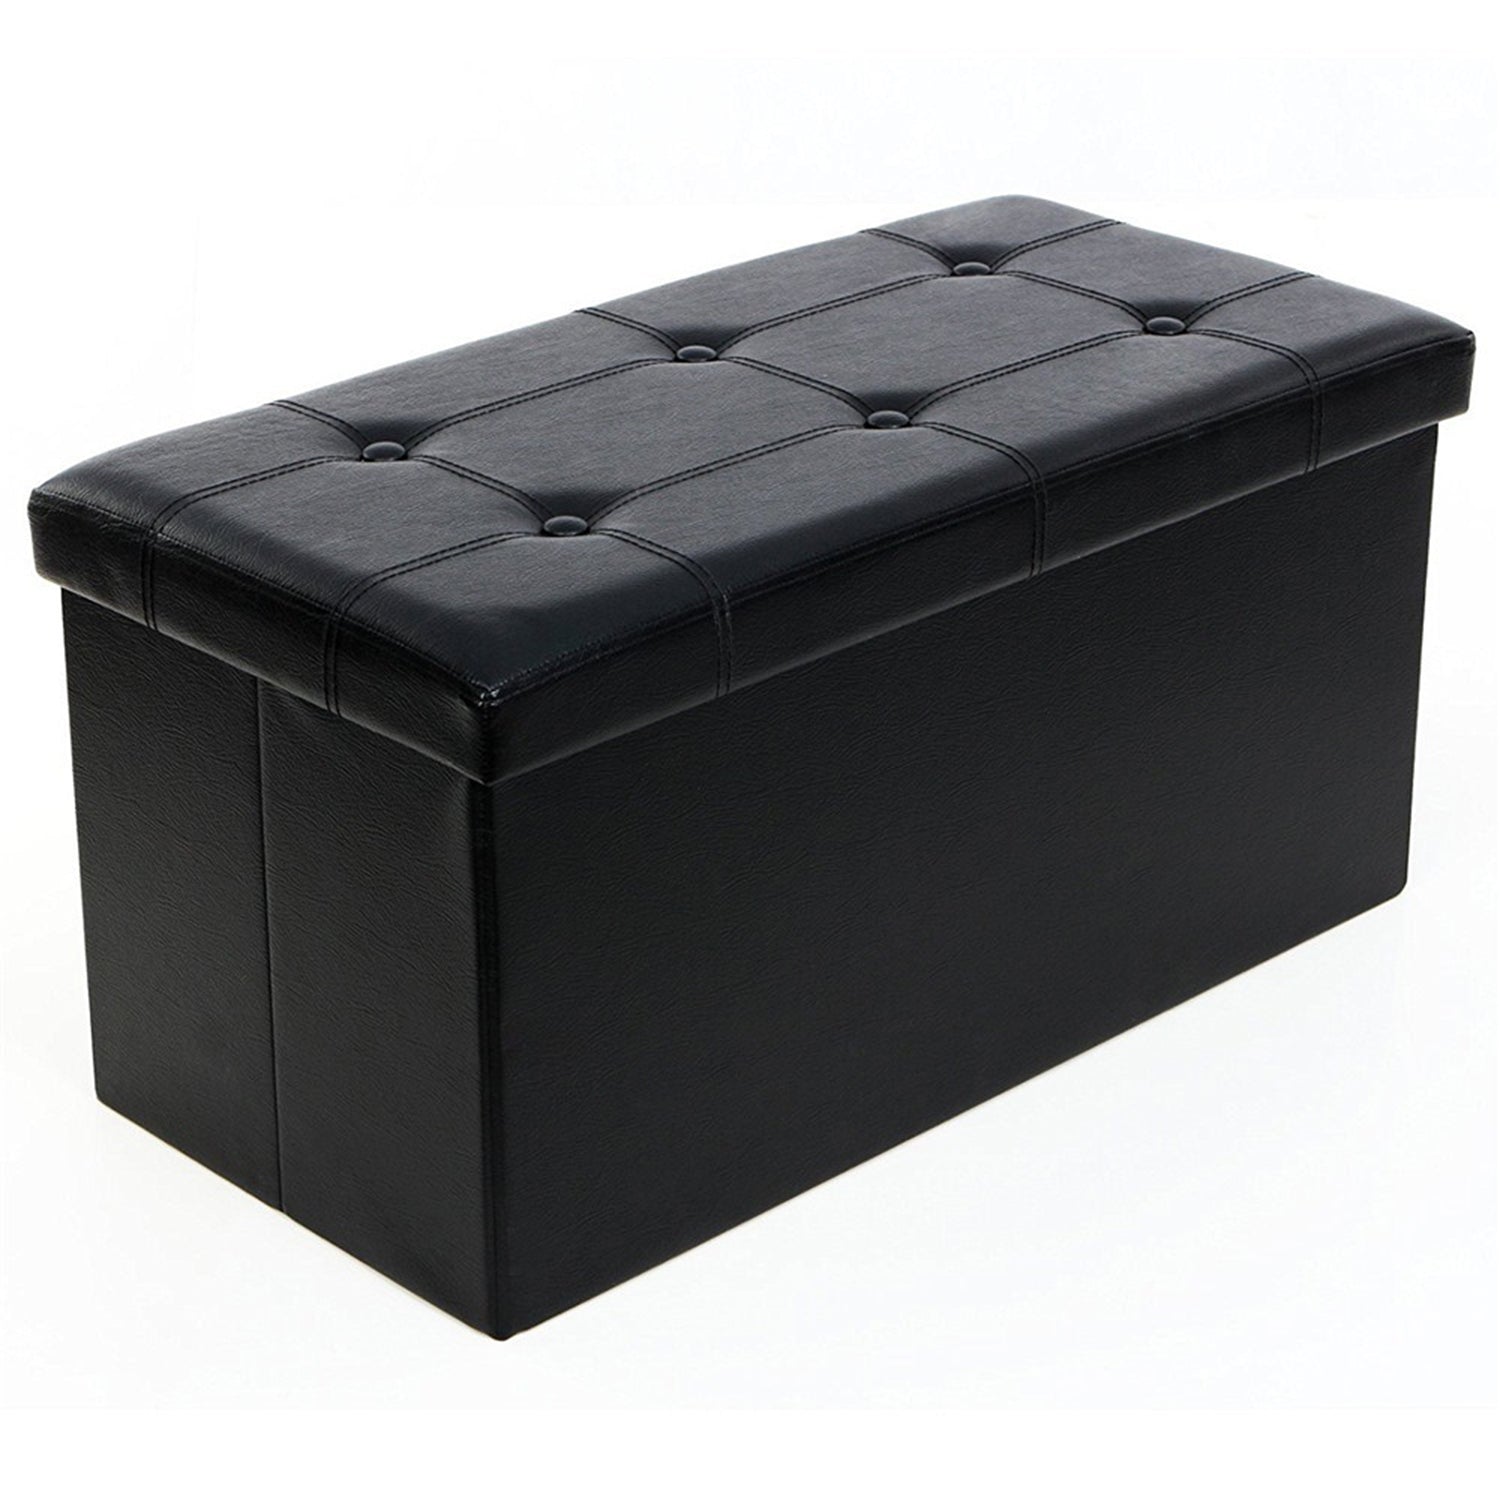 SUGIFT 30 x 15 x 15 inch footstool PU Material Black Footstool with Removable Cover